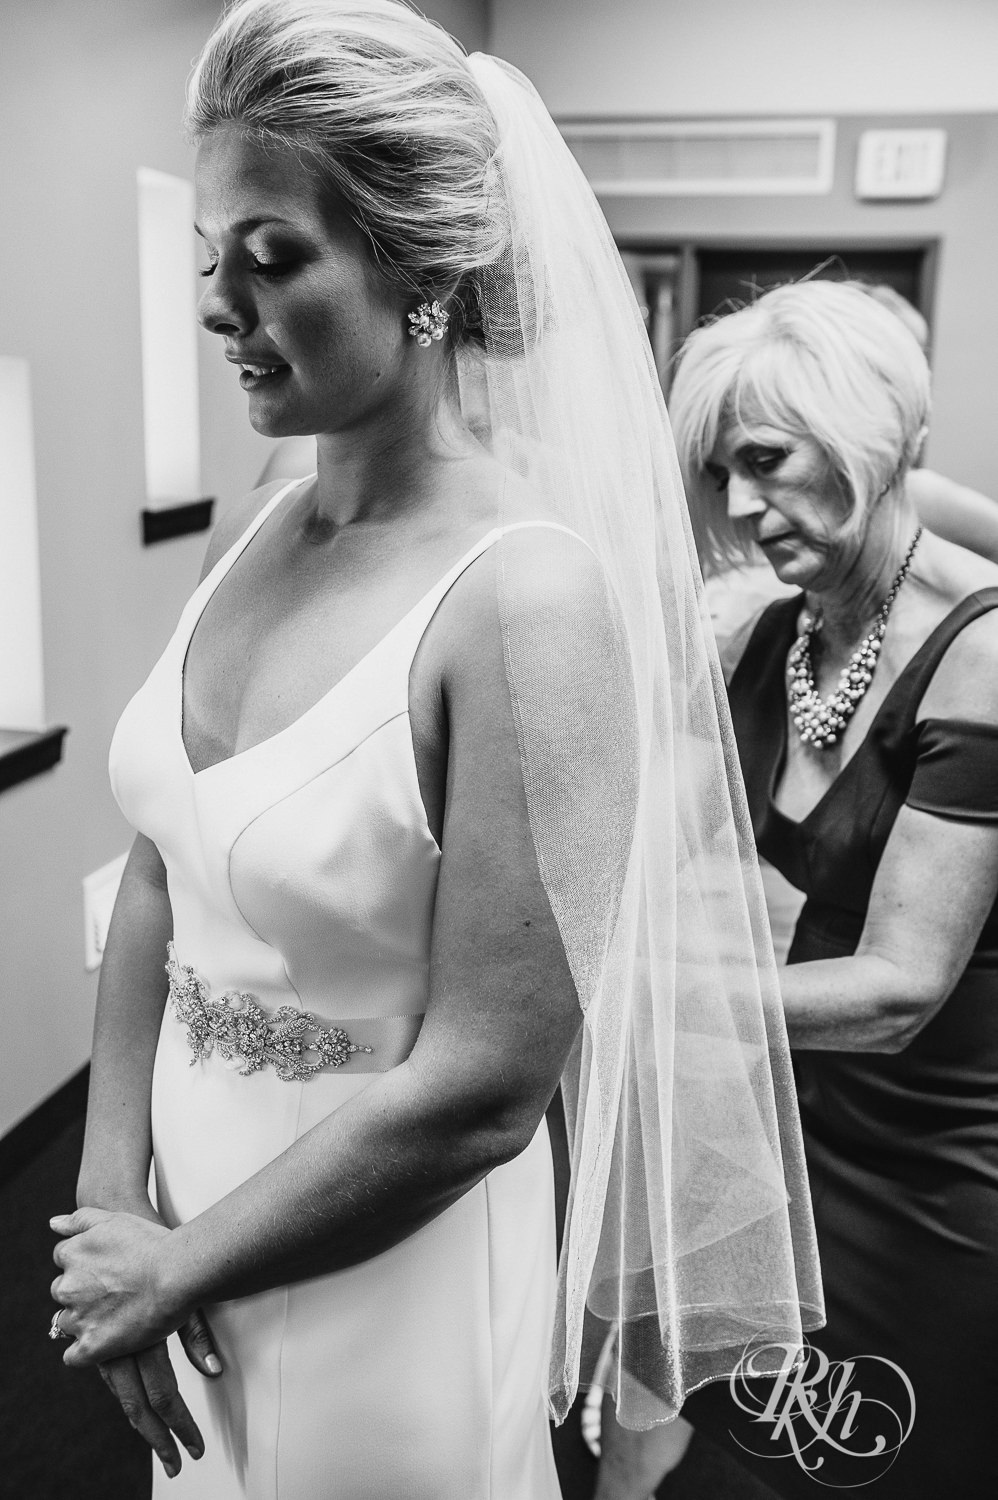 Mom helps a bride get into her dress on her wedding day.